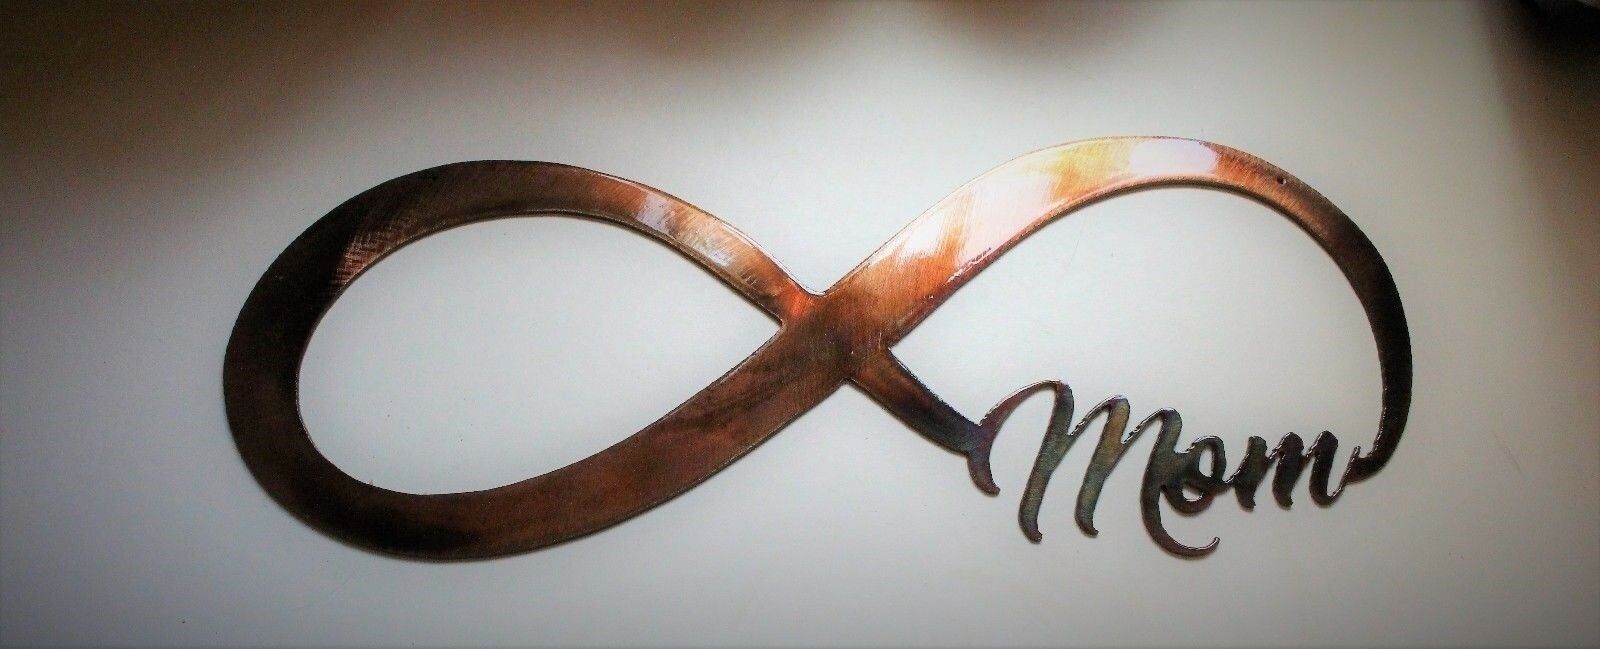 Primary image for Infinity Mom Metal Wall Art Decor Copper/Bronze Plated 15 1/4" x 6"